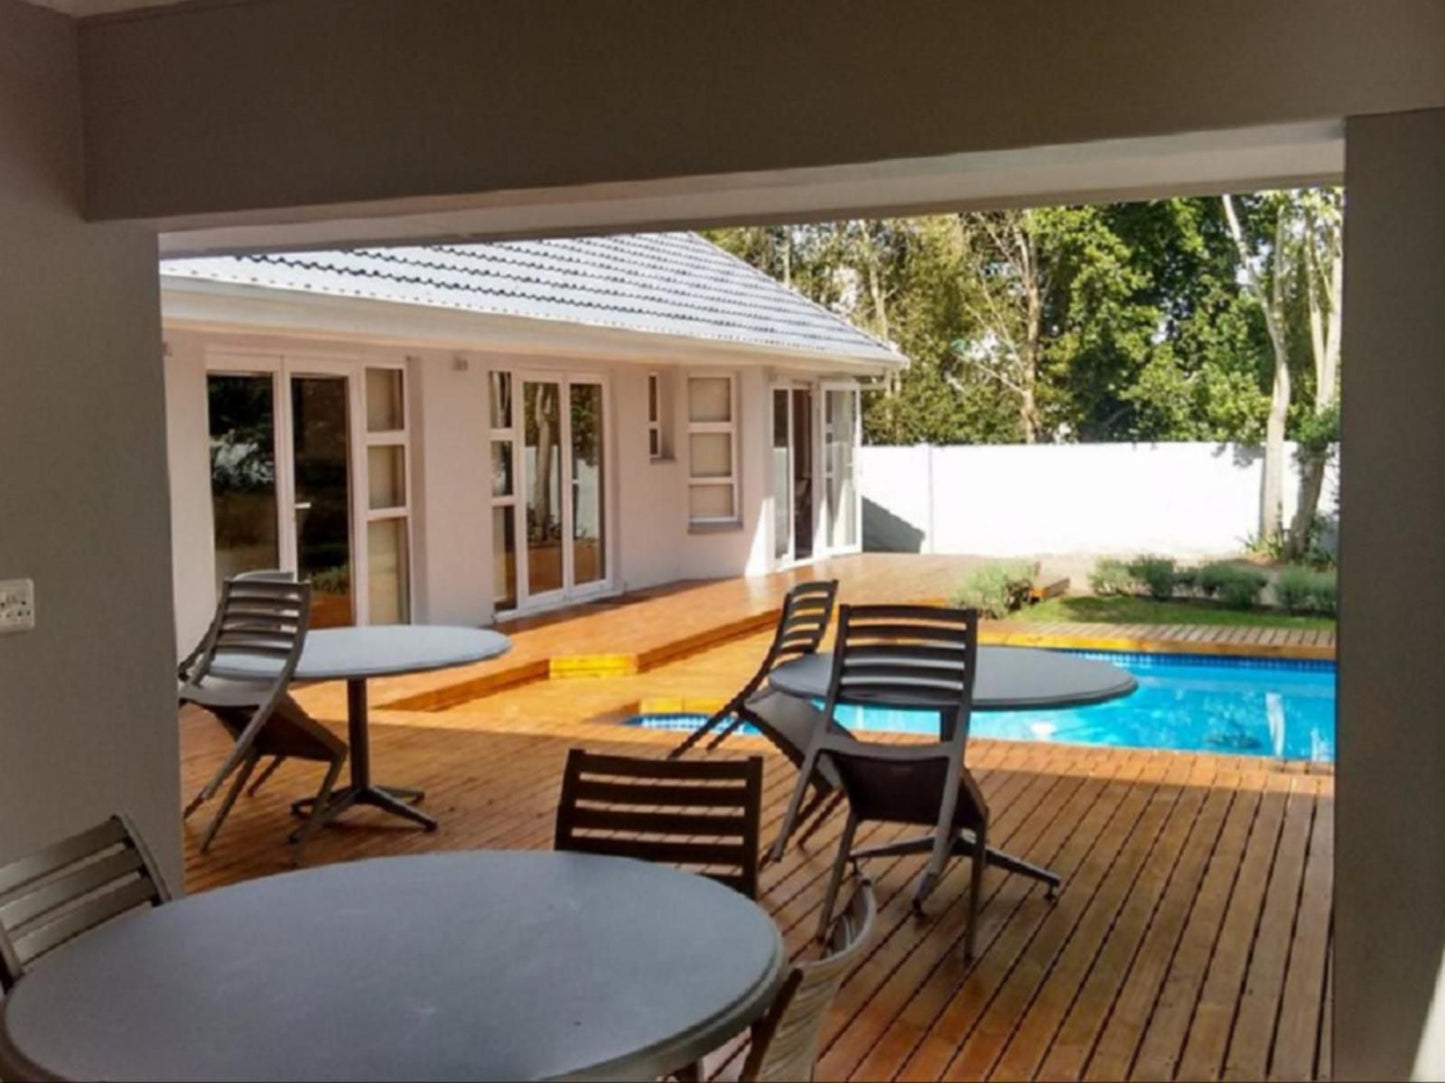 Outeniqua Inn Heatherlands George Western Cape South Africa House, Building, Architecture, Swimming Pool